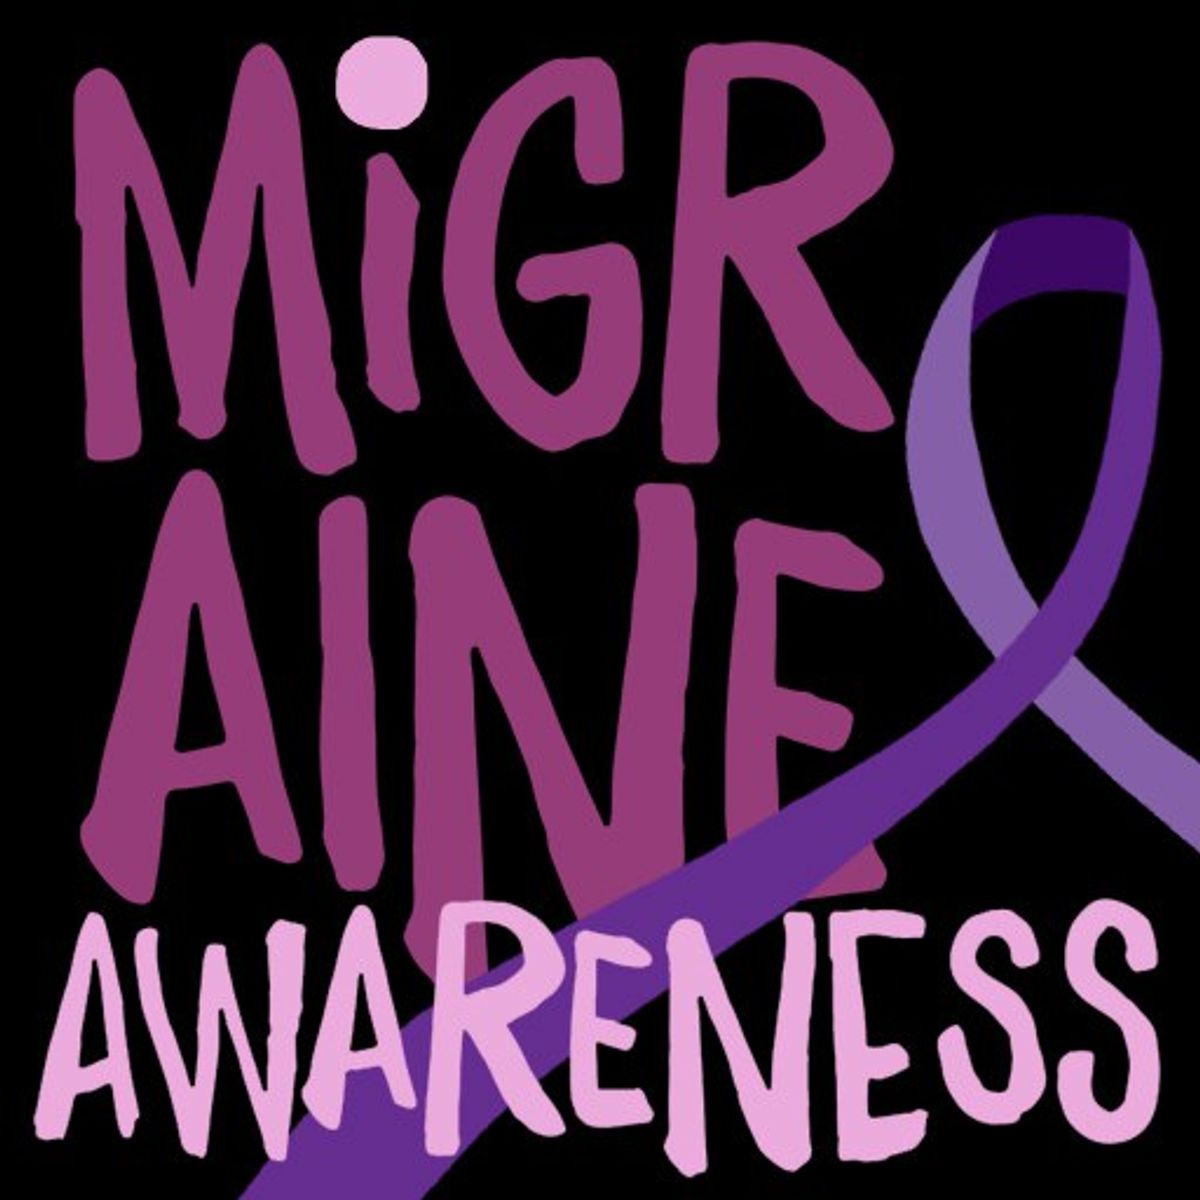 What People Who Get Migraines Want You To Know